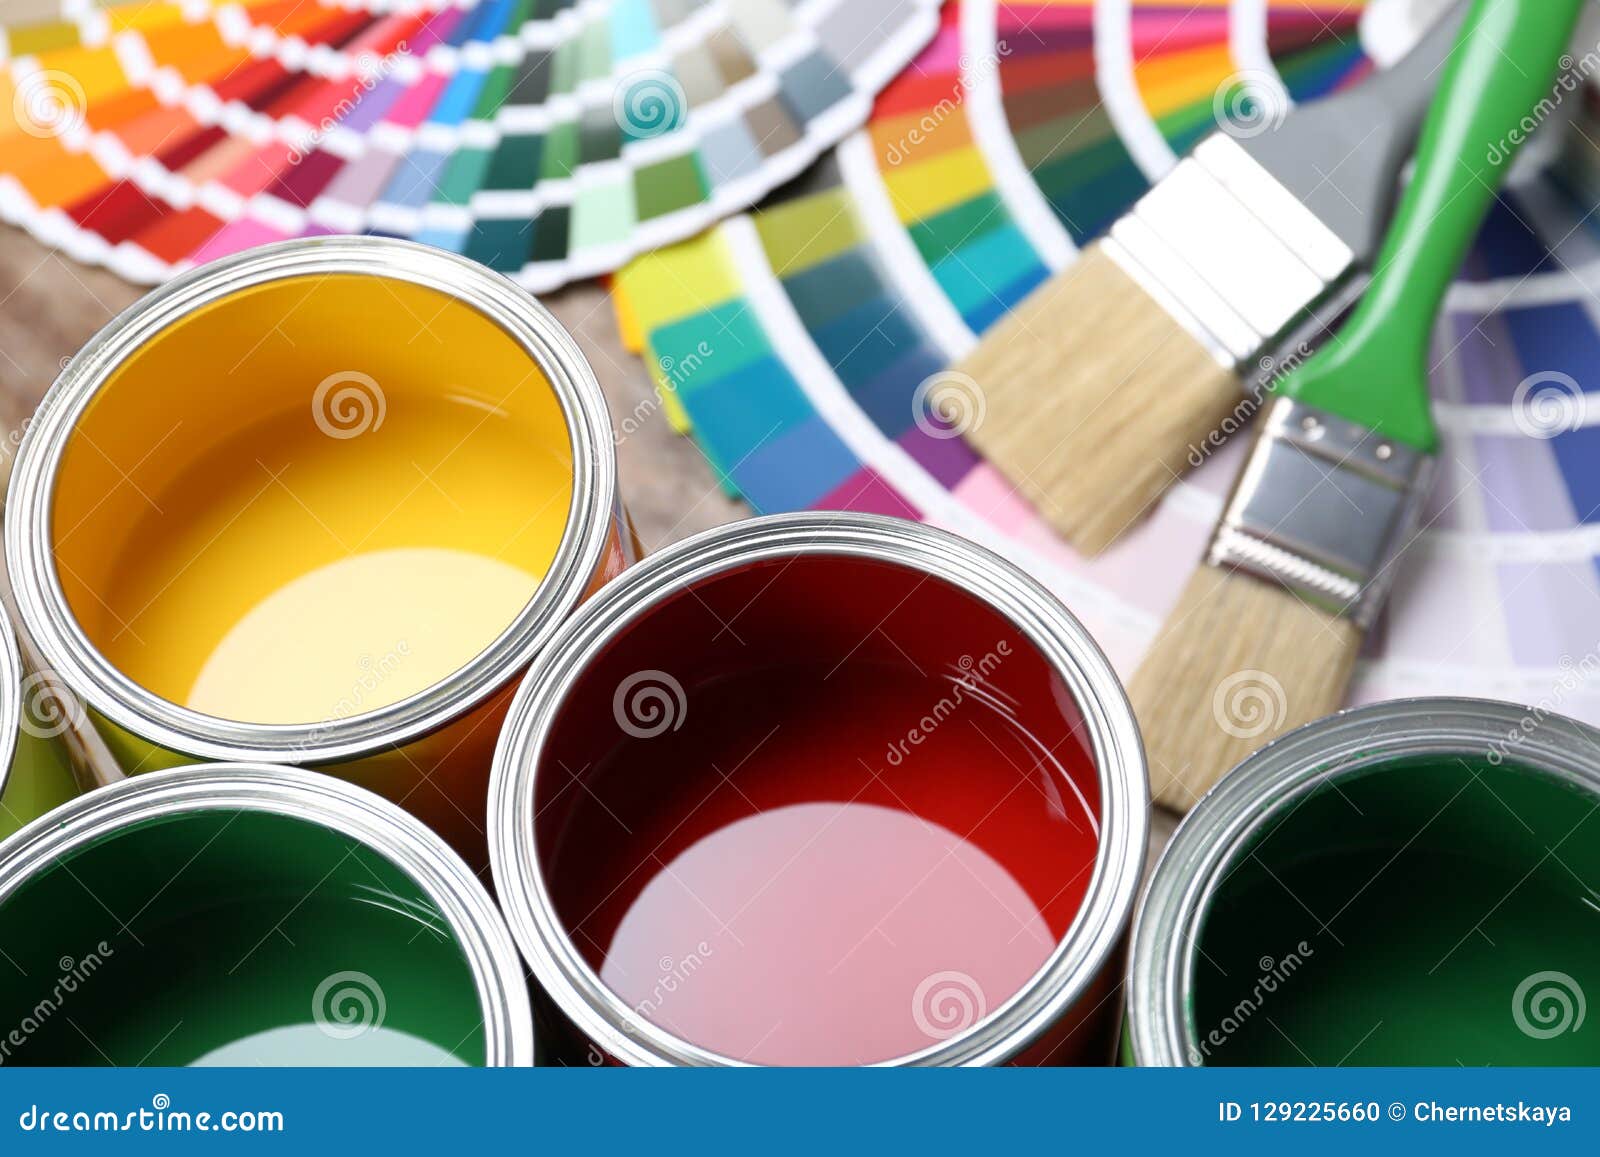 paint cans, color palette samples and brushes on table